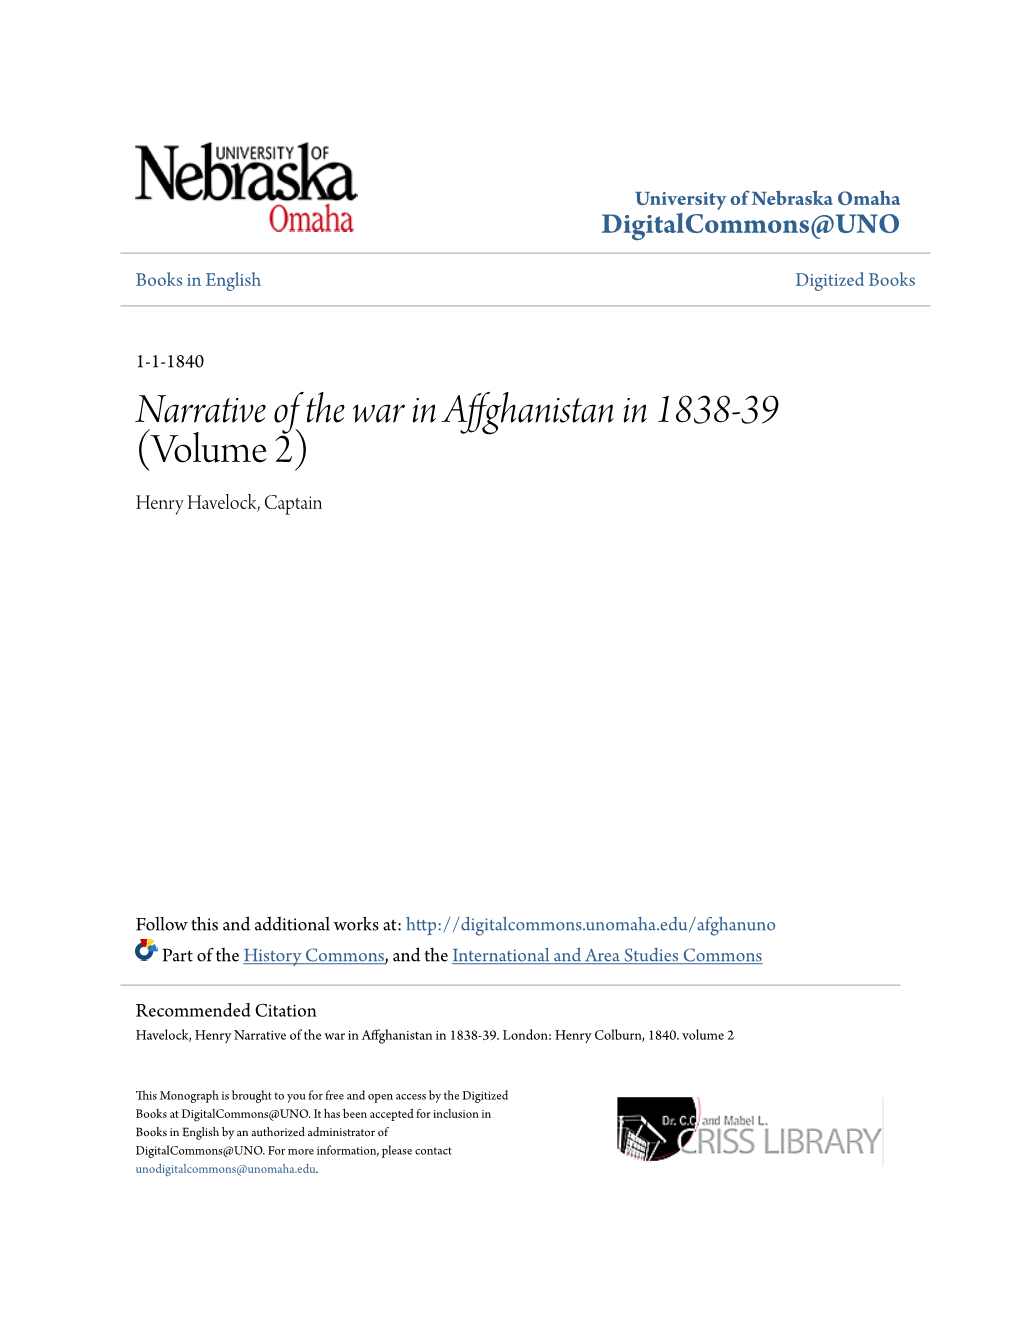 Narrative of the War in Affghanistan in 1838-39 (Volume 2) Henry Havelock, Captain